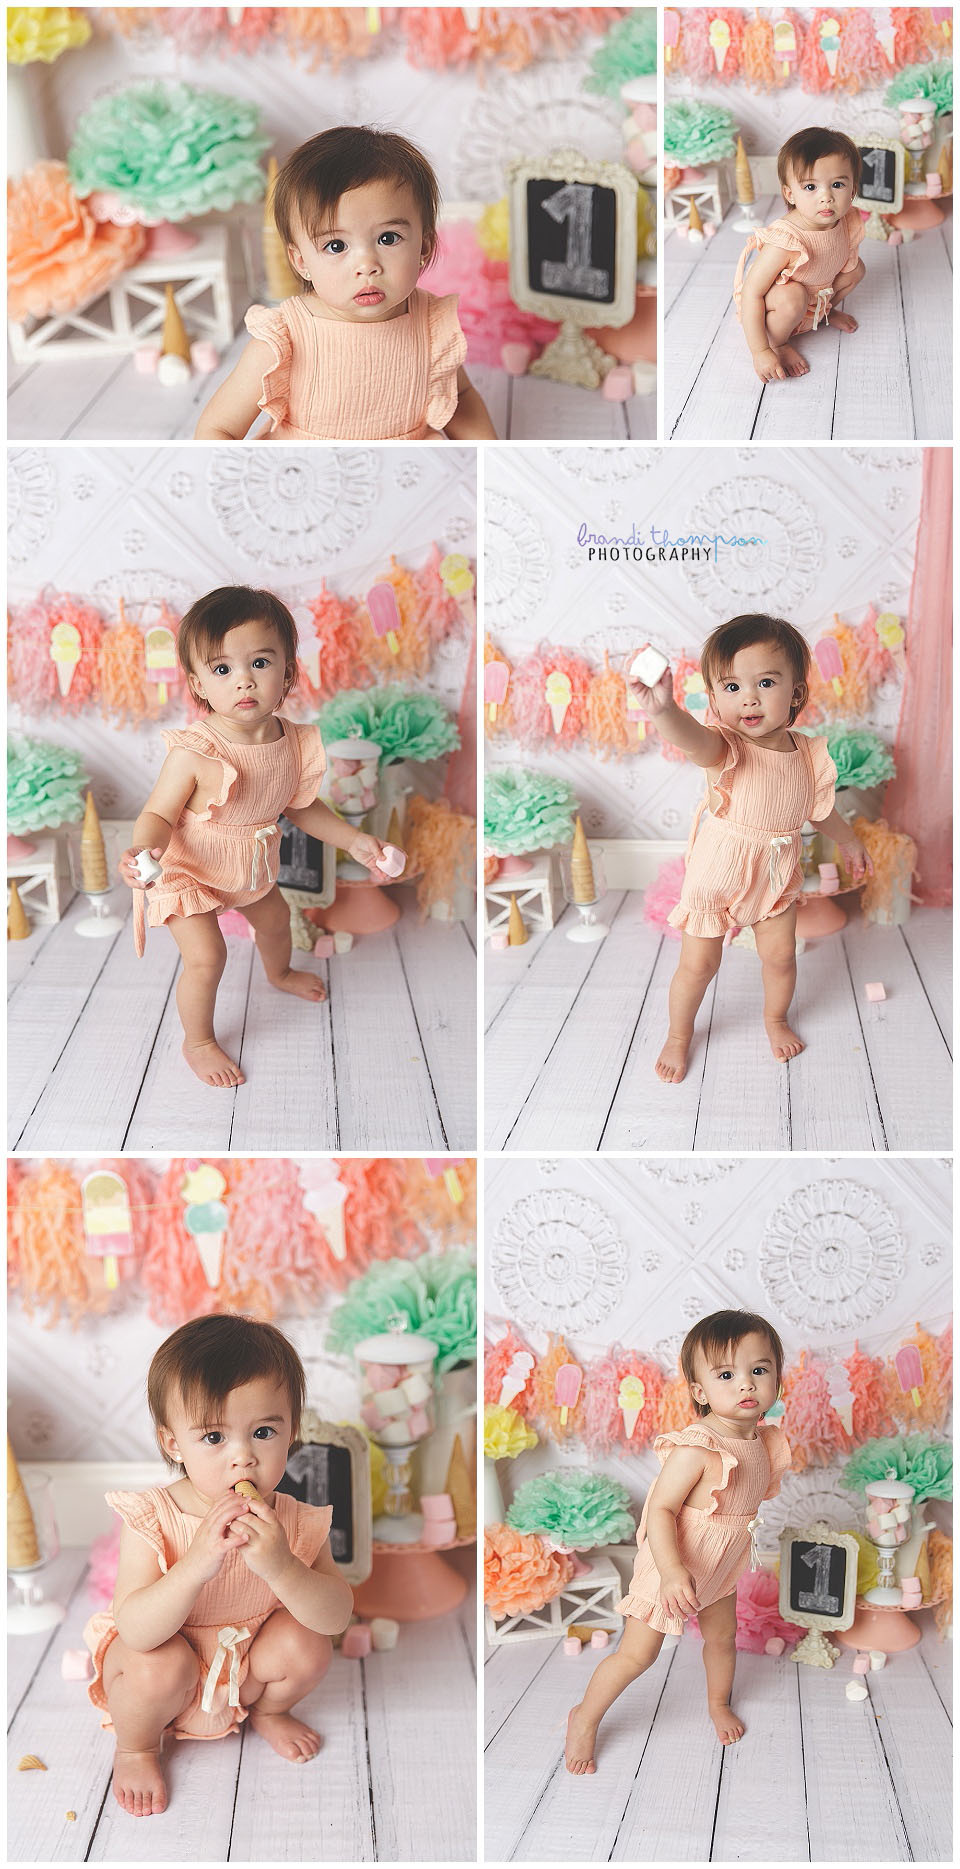 one year old baby girl with medium skin tone and dark hair, in studio with white and pastel decorations, cake smash